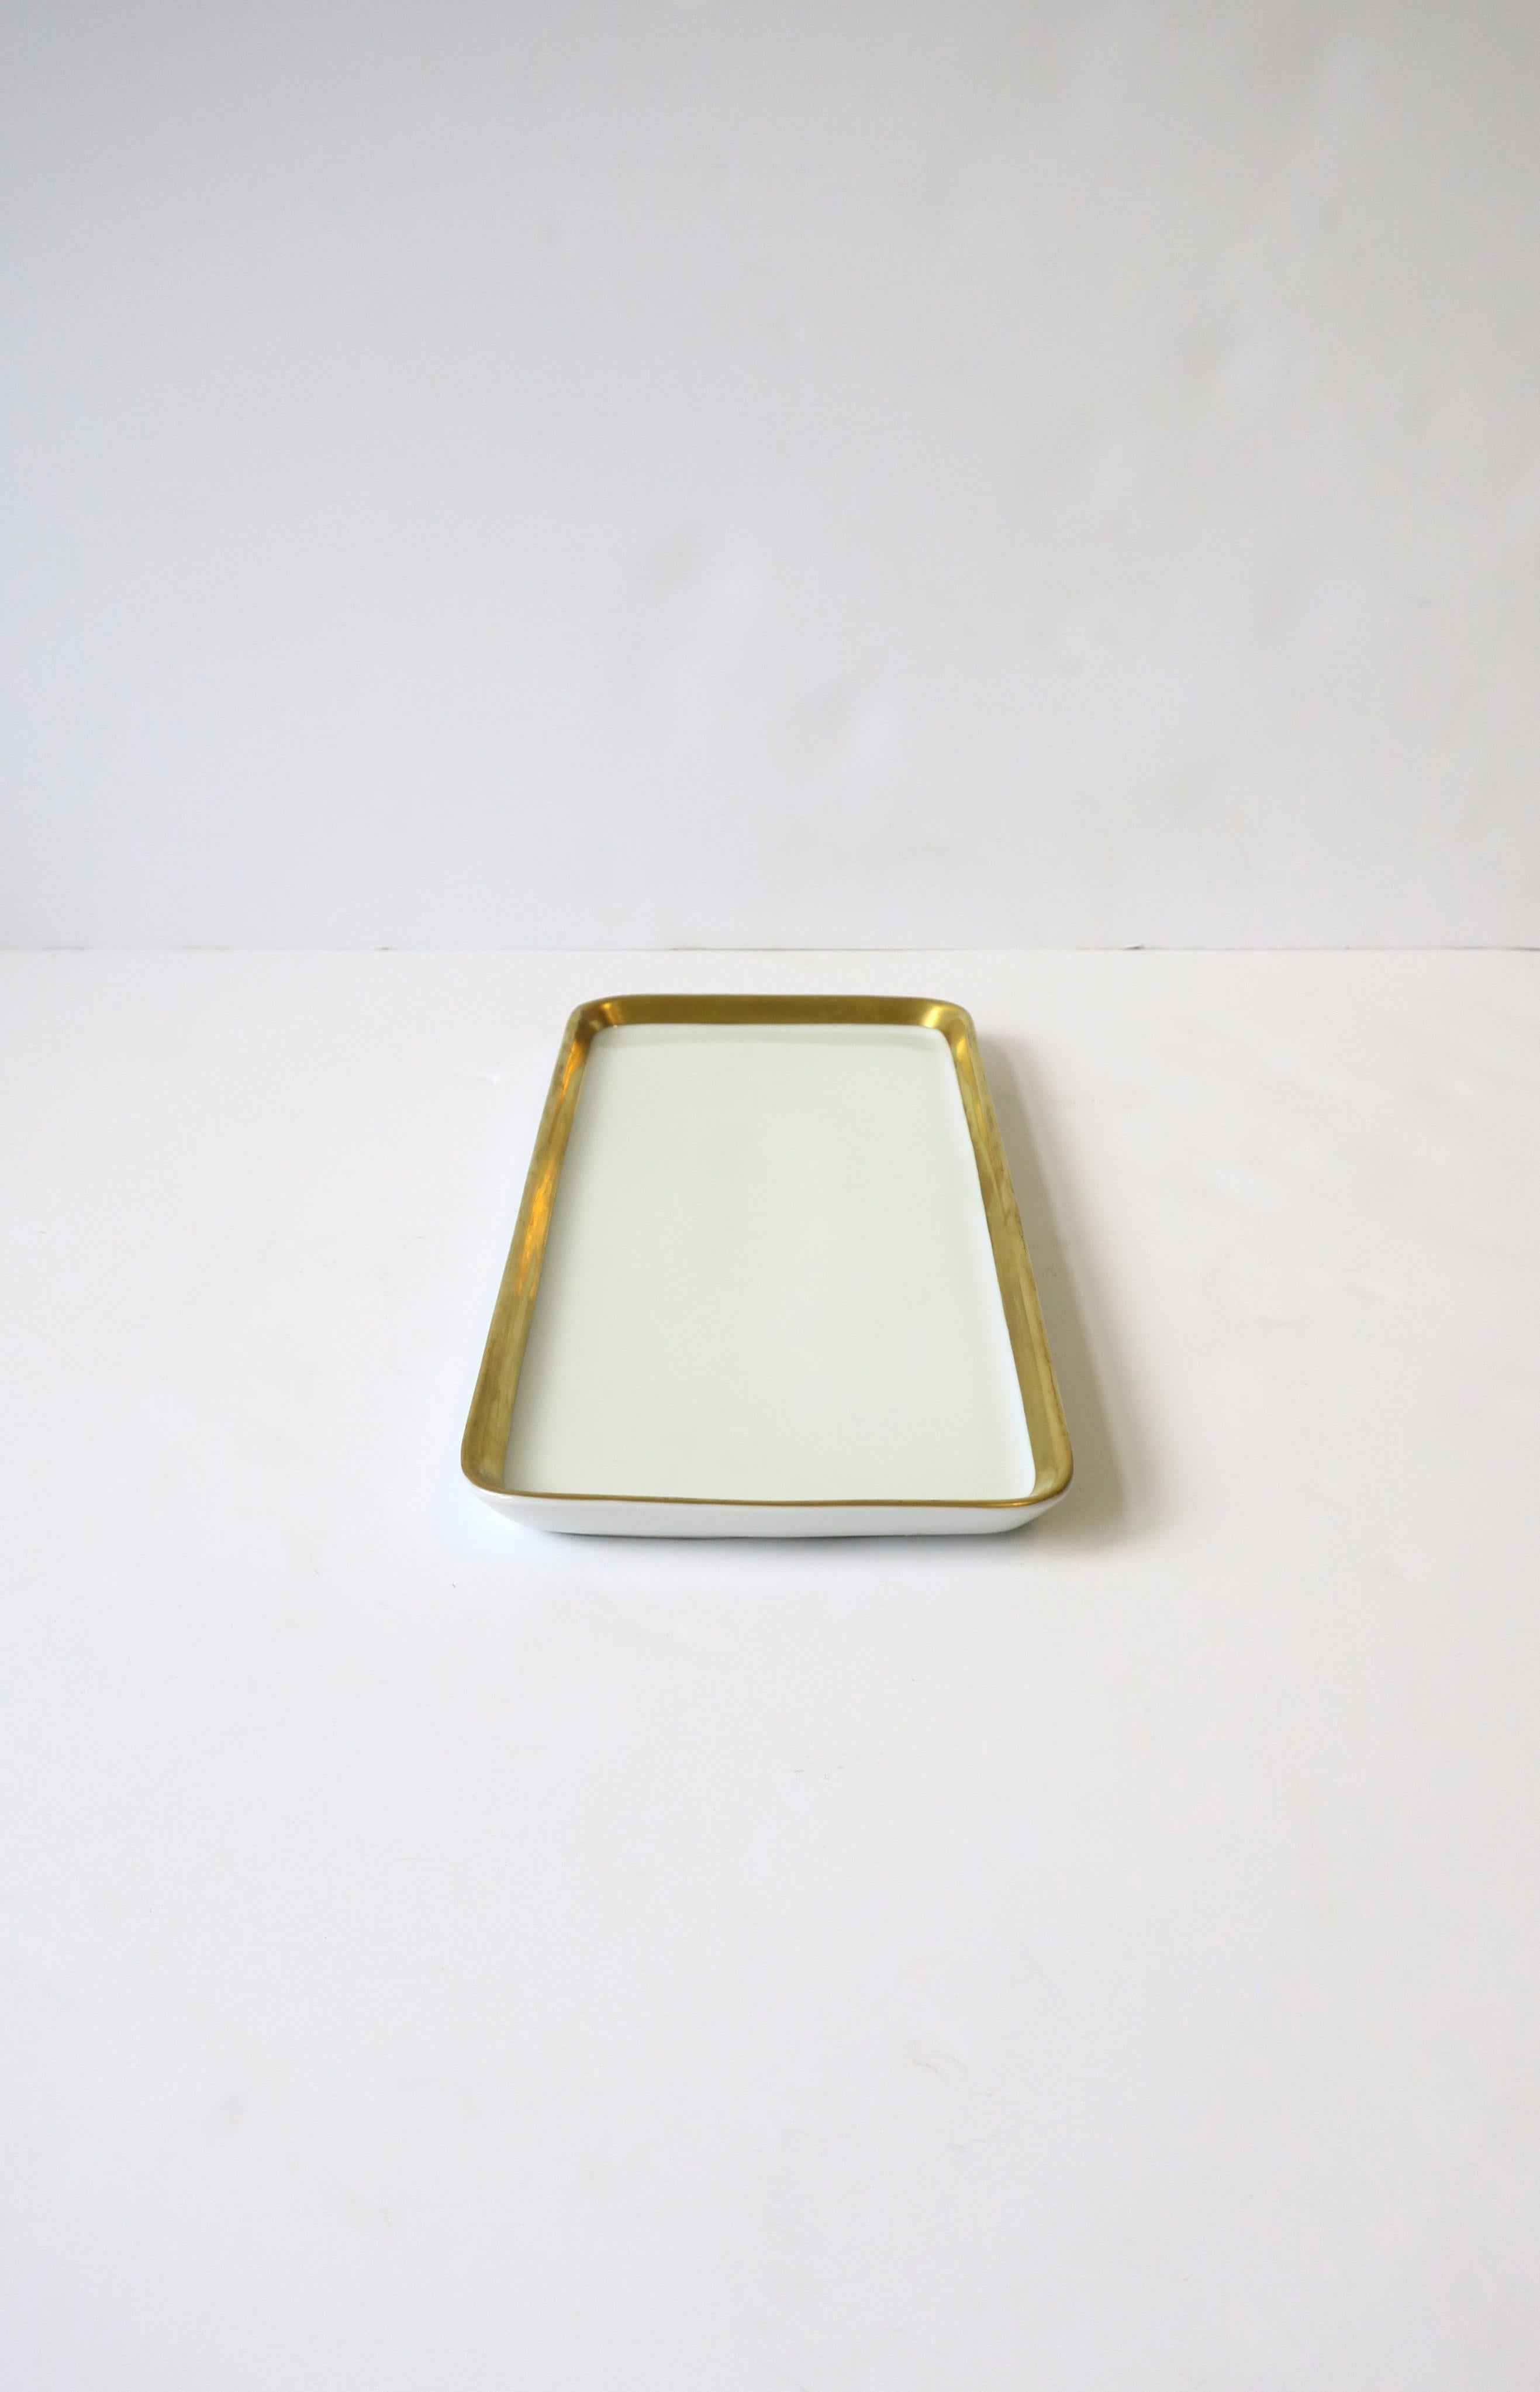 White Porcelain and Gold Serving Tray by Rosenthal Kurfurstendamm Berlin For Sale 3